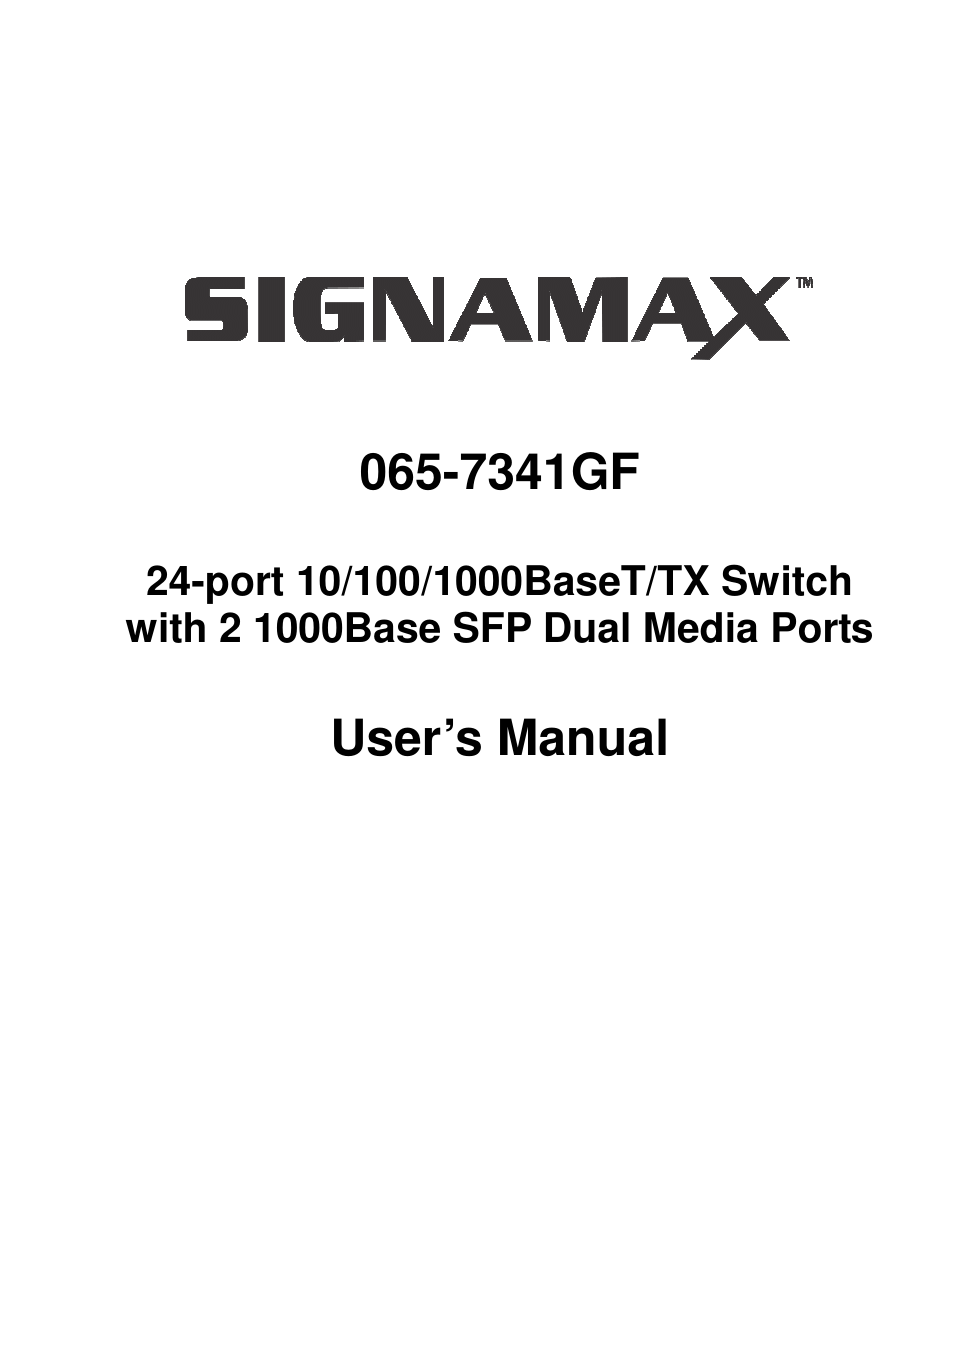 24-Port 10/100/1000 Unmanaged Switch with Two Dual Media Ports